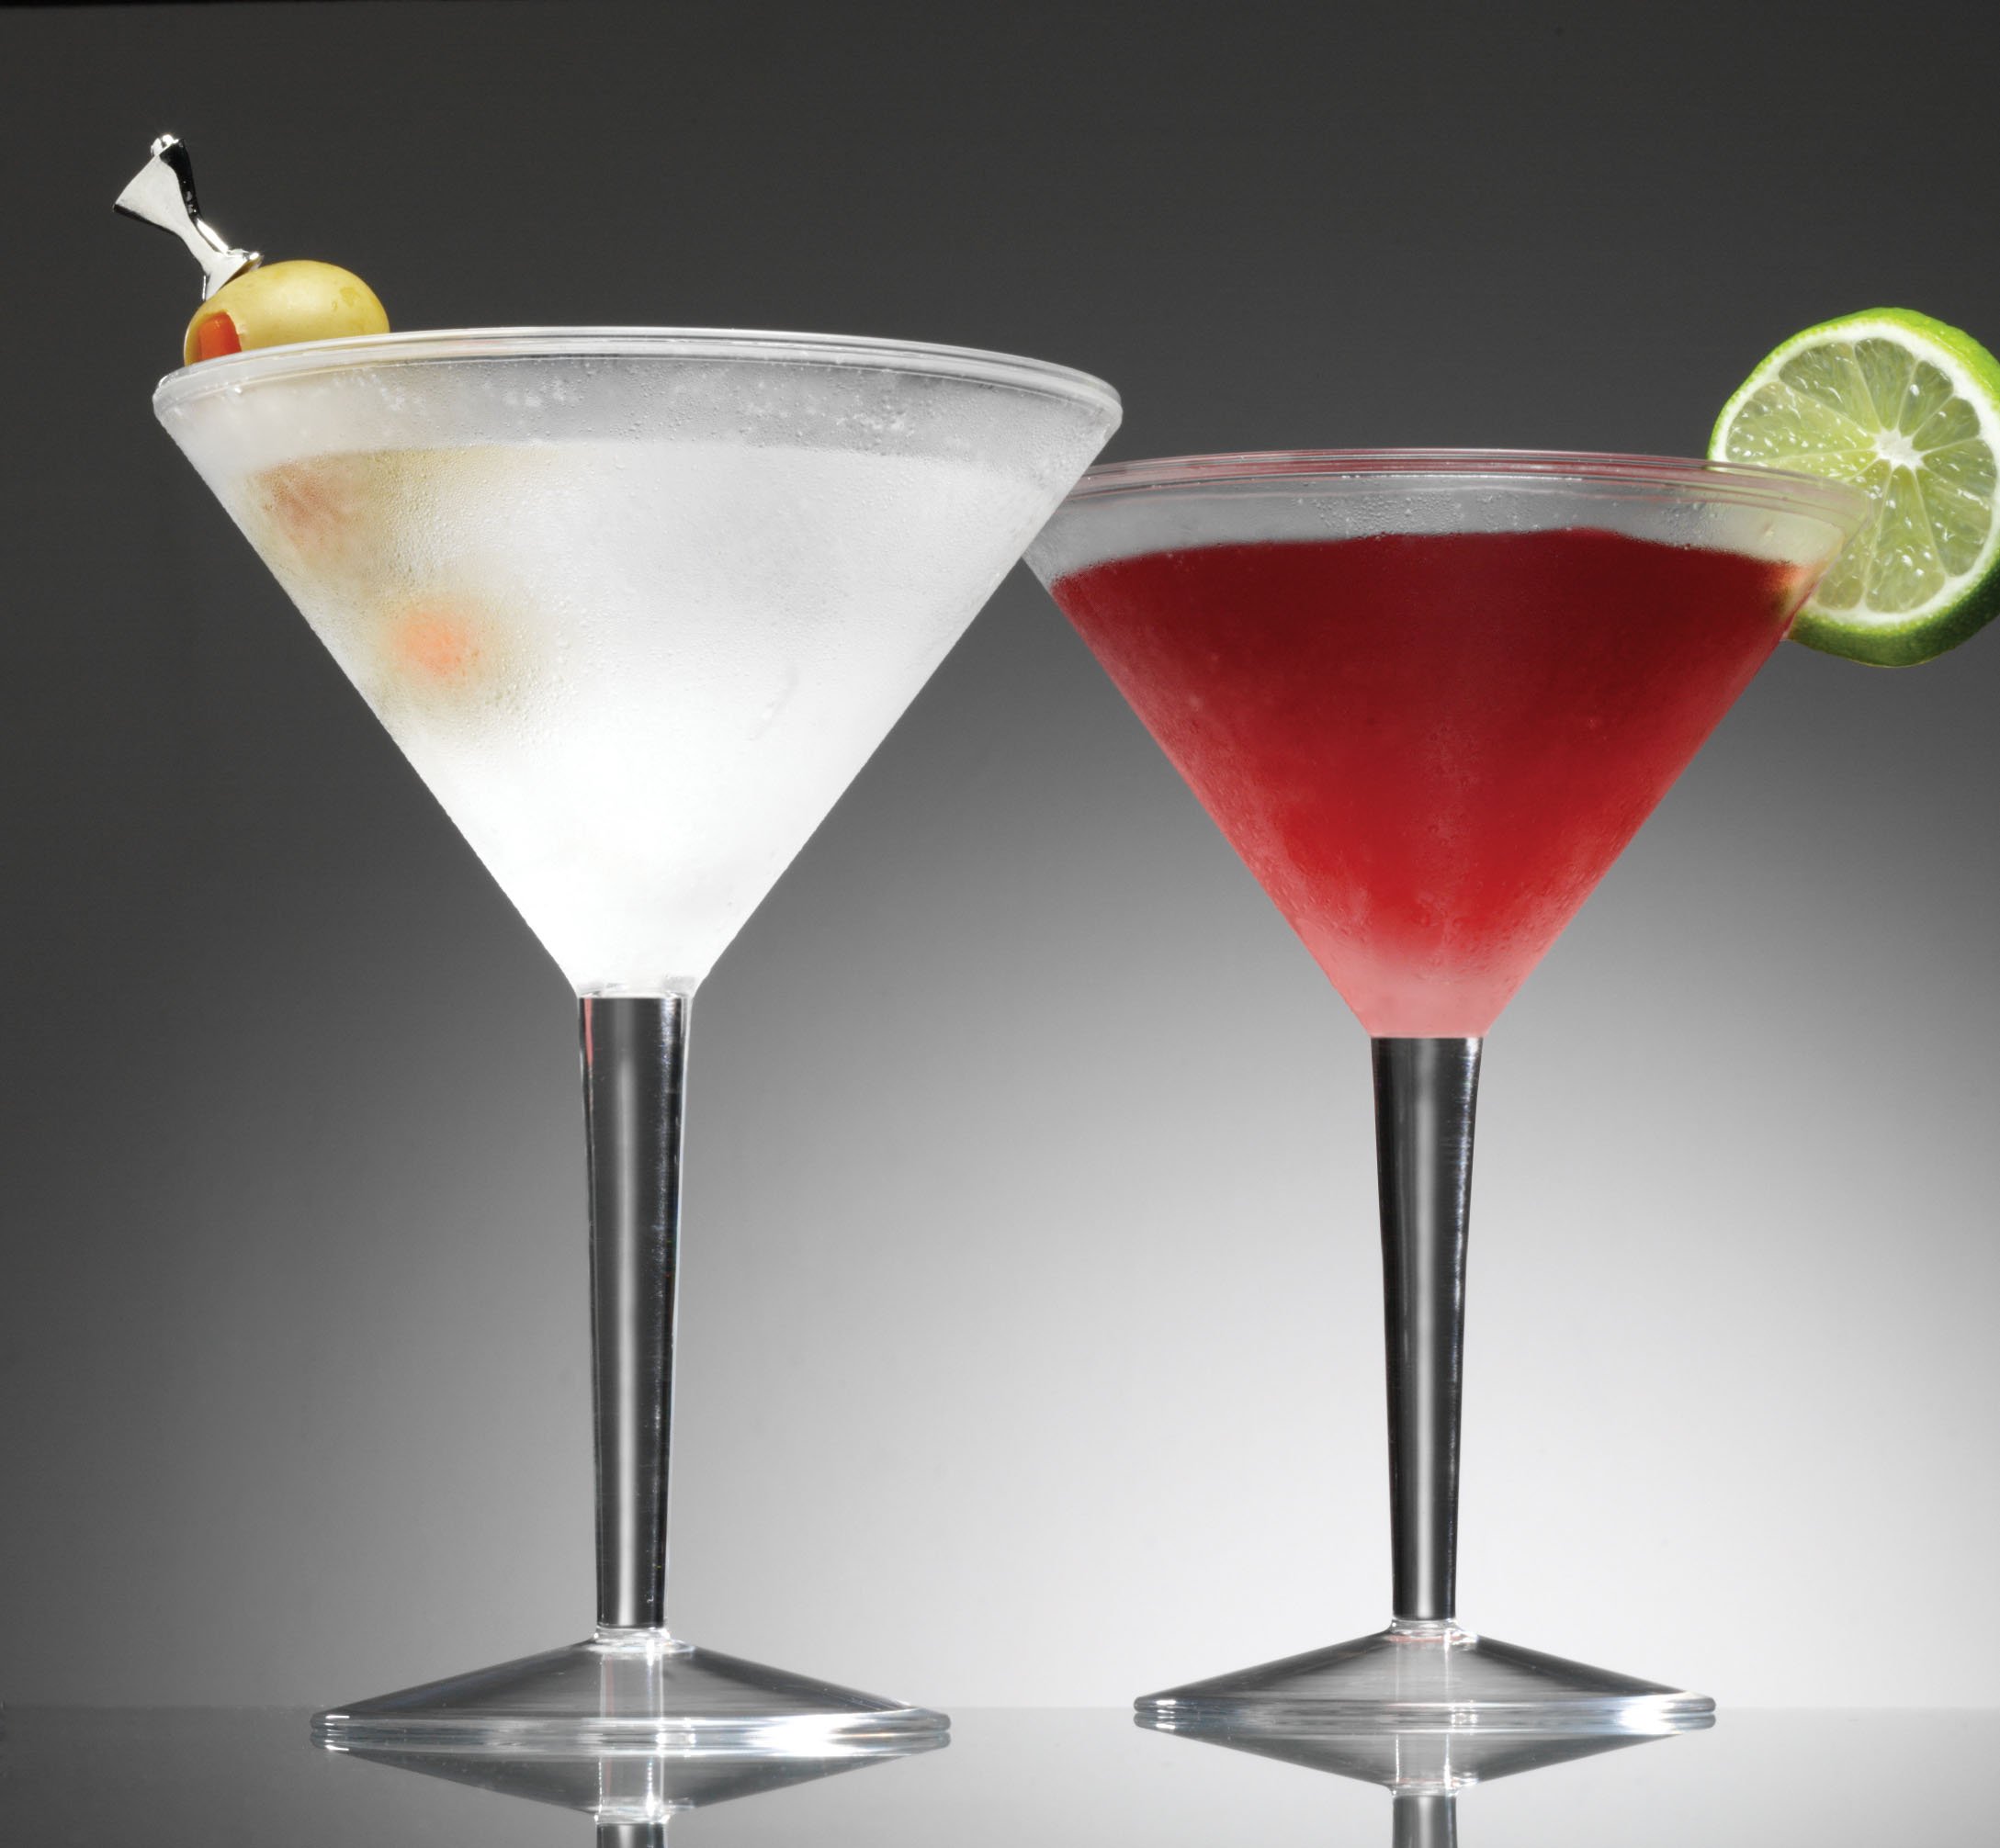 IM-10 - Iced Martini - Inset - Propped.jpg